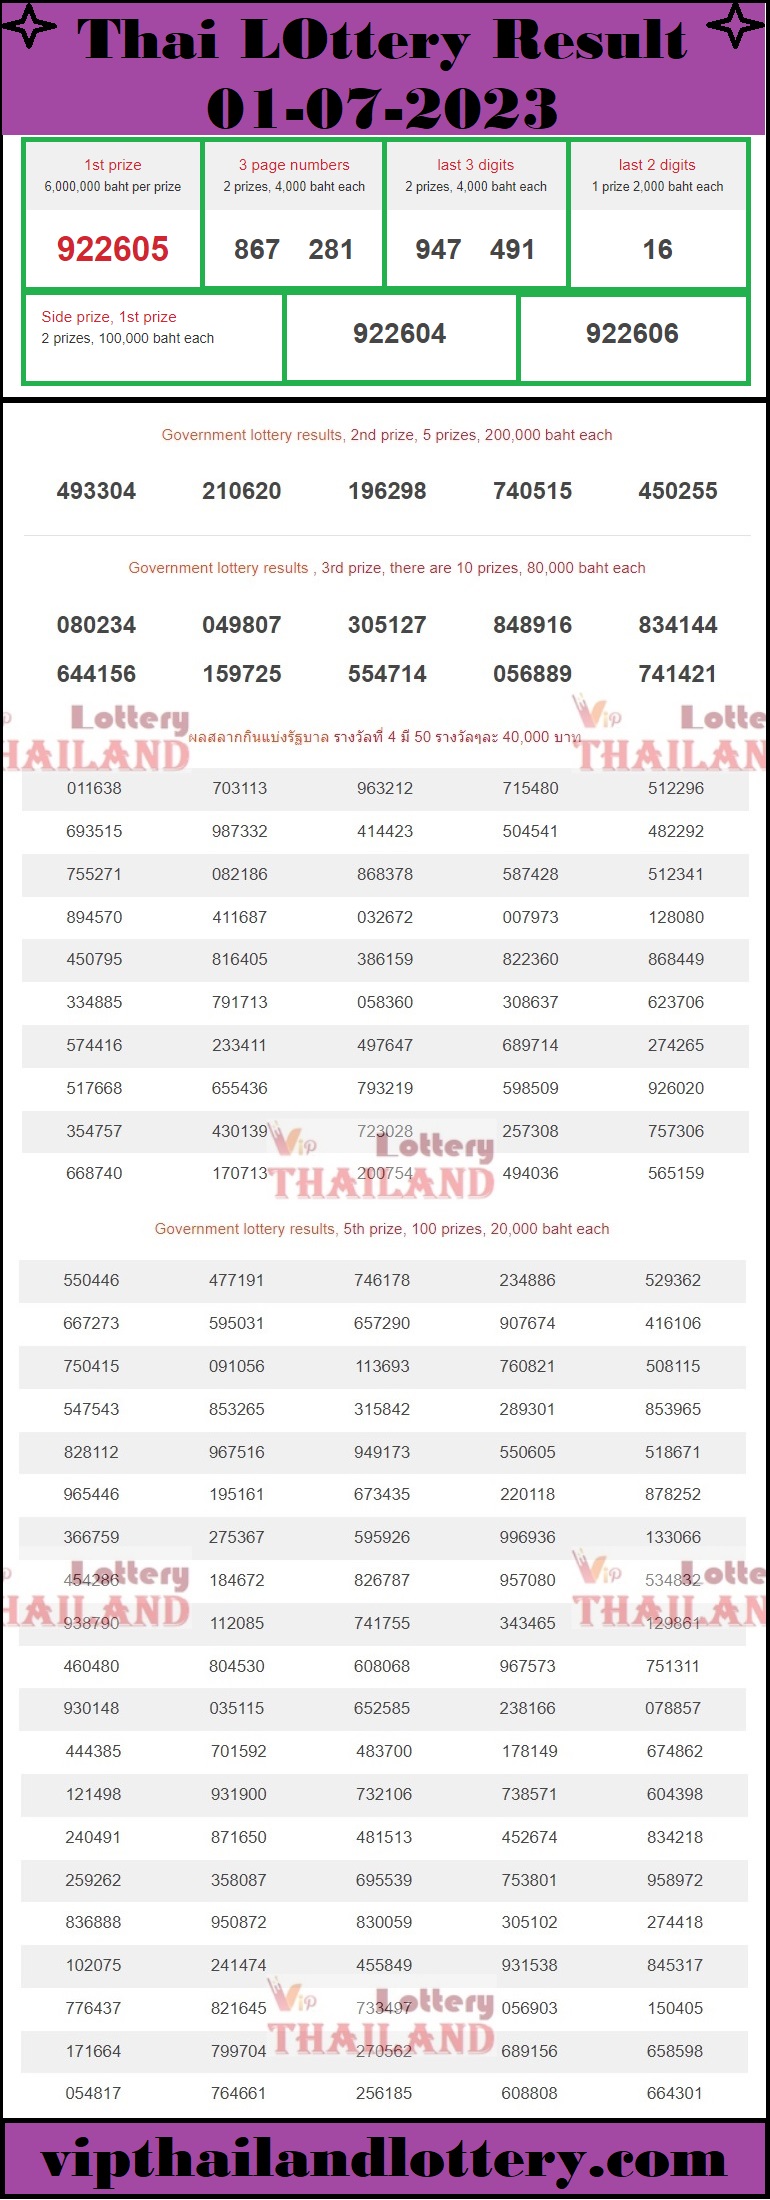 Thai Lottery Result Live Update 1-07-2023